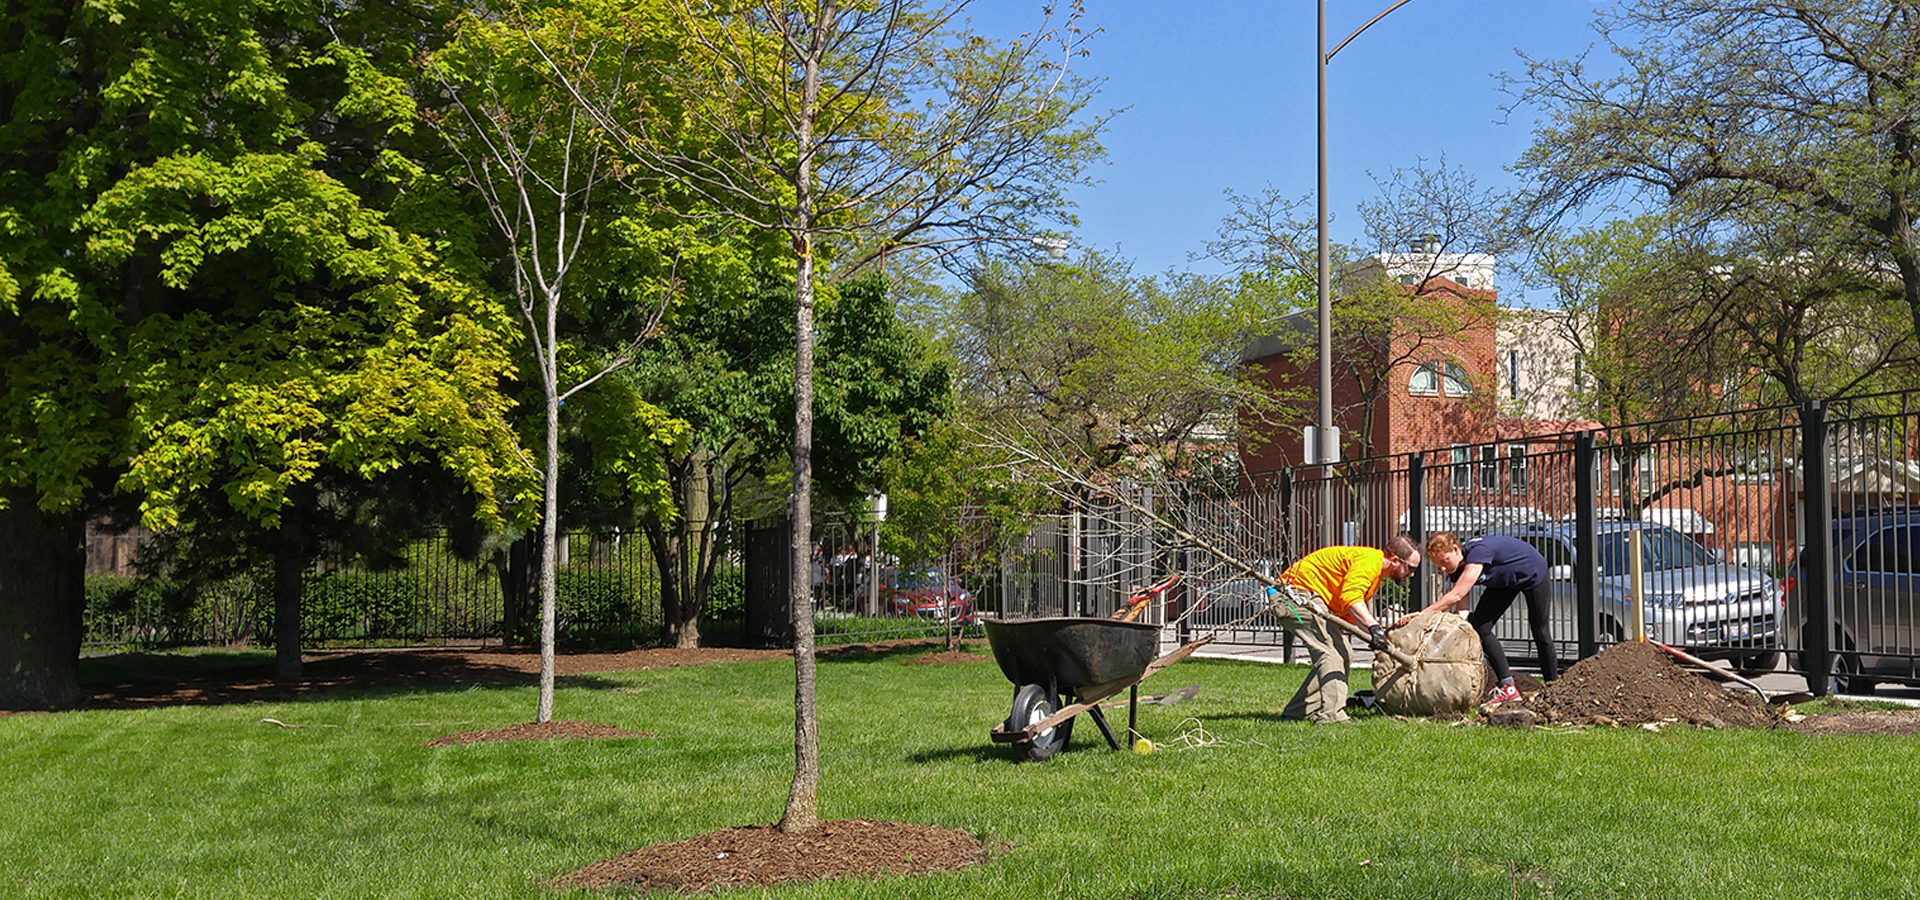 Volunteers plant a tree at the University of Chicago